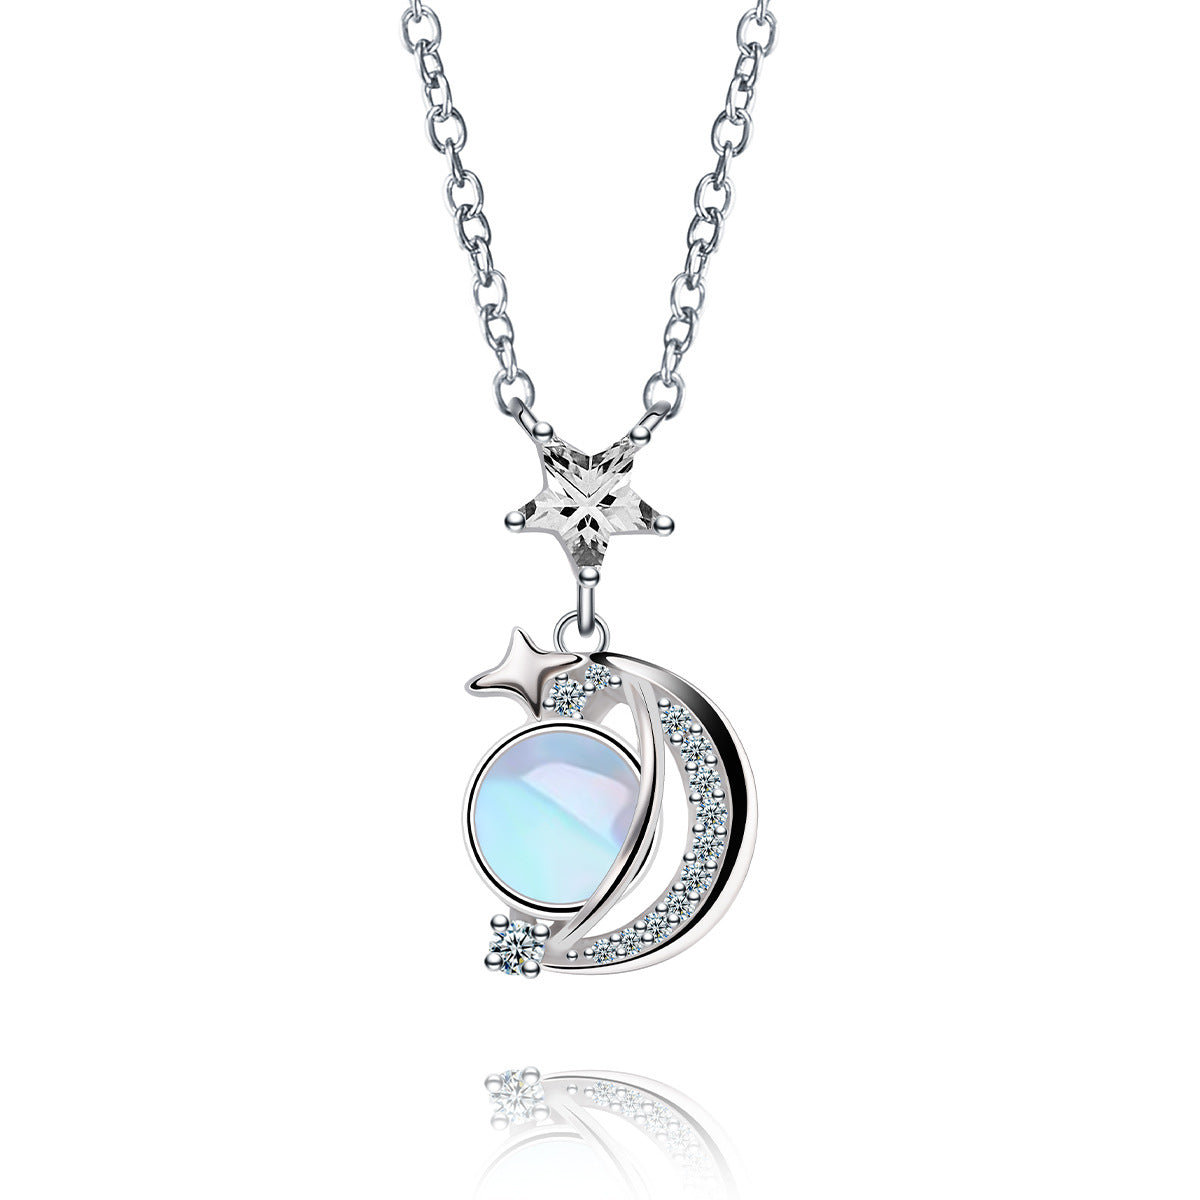 Women's Sterling Silver Fashion Design Star Moon Necklace